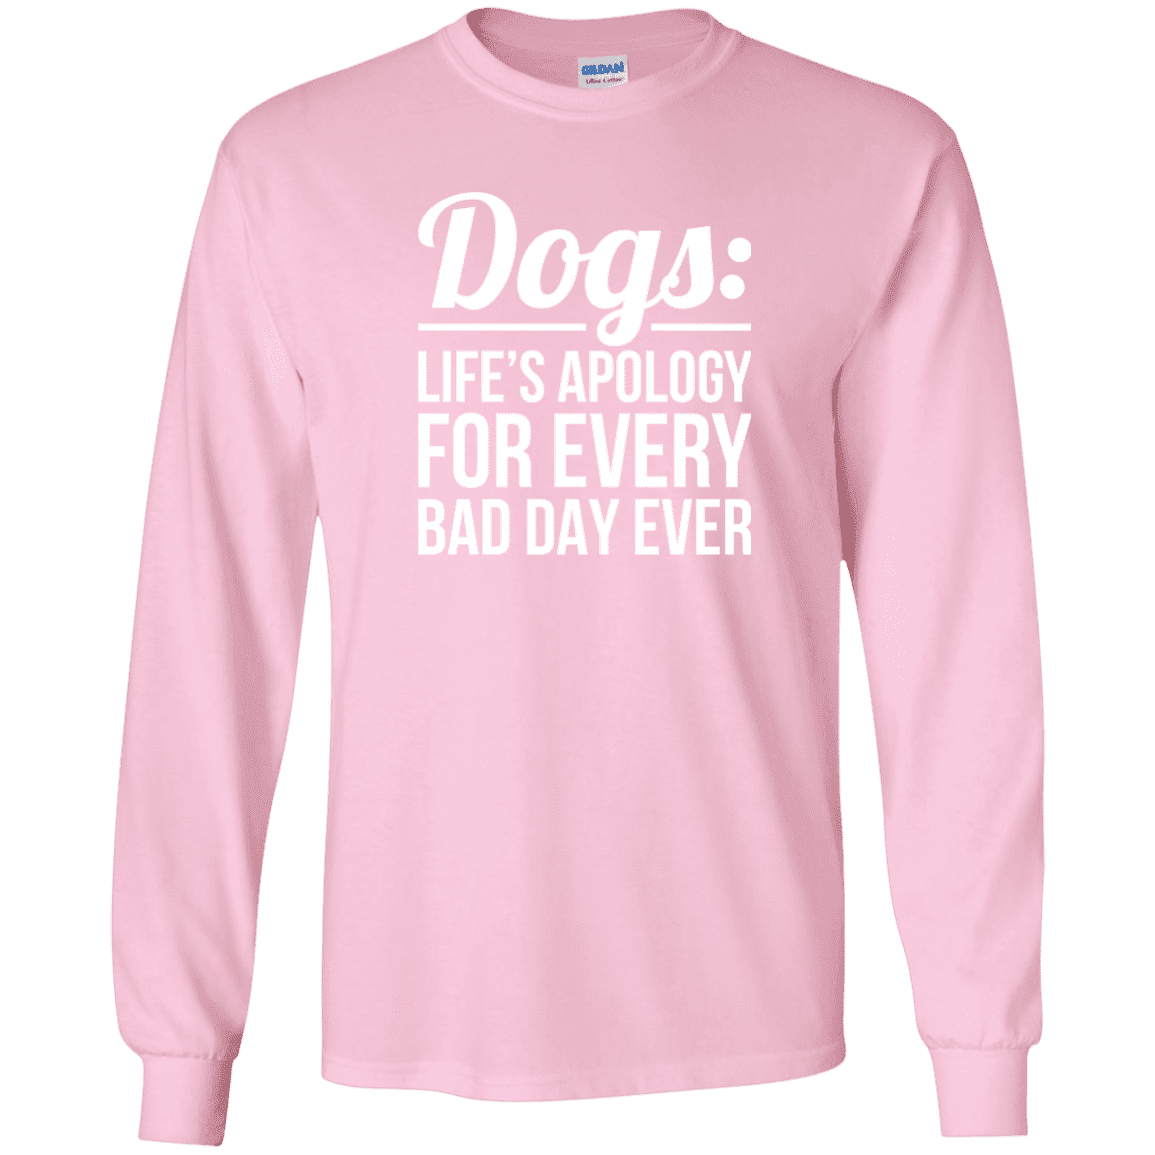 Dogs Life's Apology - Long Sleeve T Shirt.